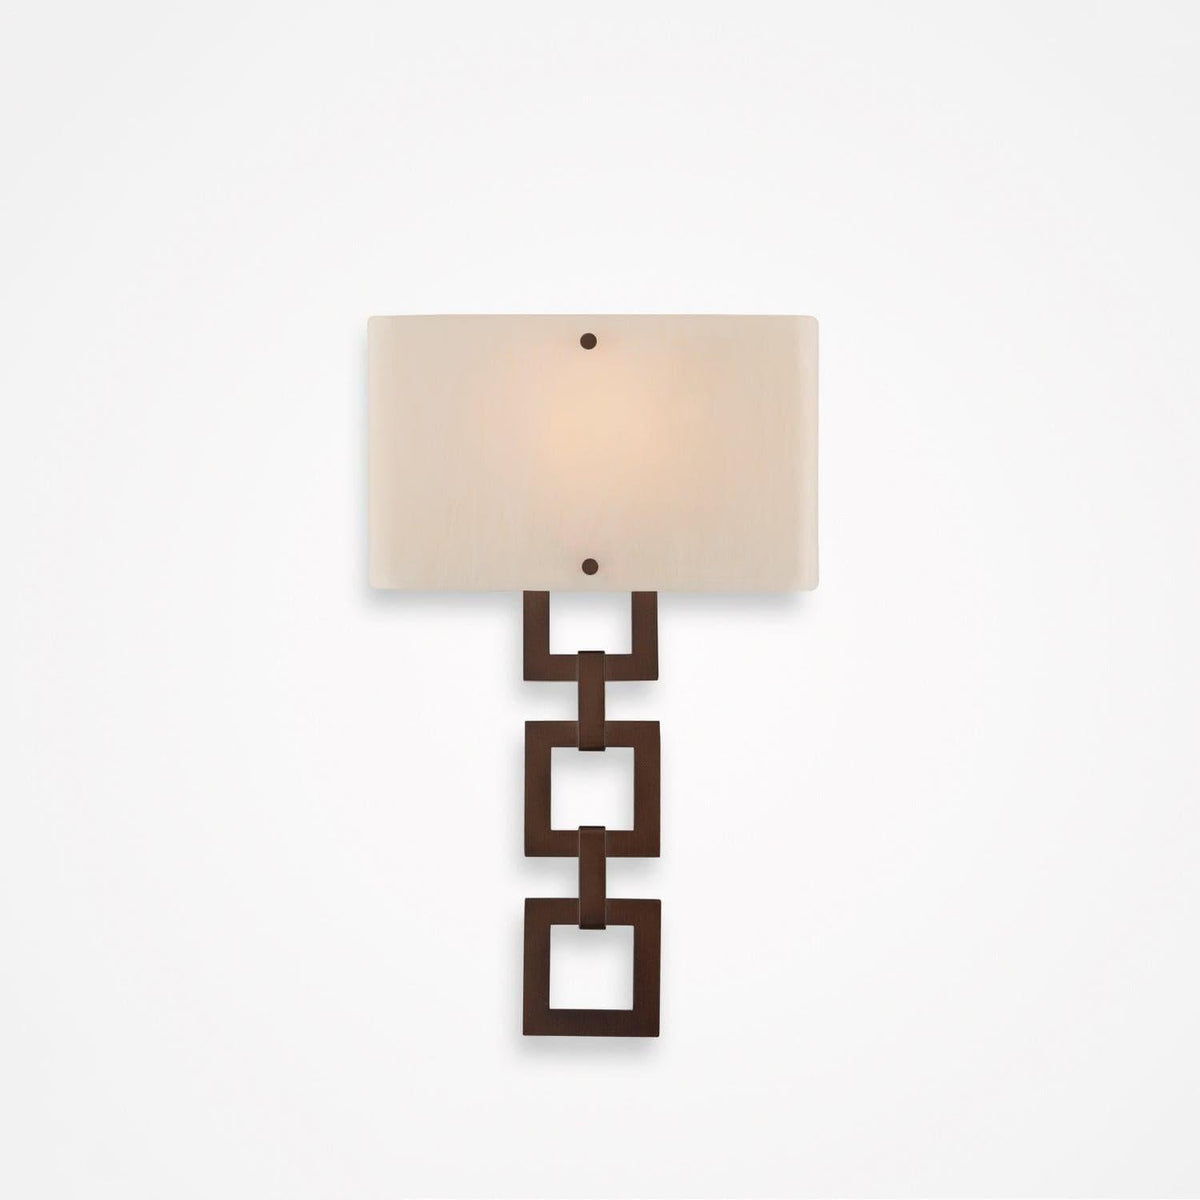 Hammerton Studio - Carlyle Square Link Cover Sconce - CSB0033-0B-RB-IW-E2 | Montreal Lighting & Hardware